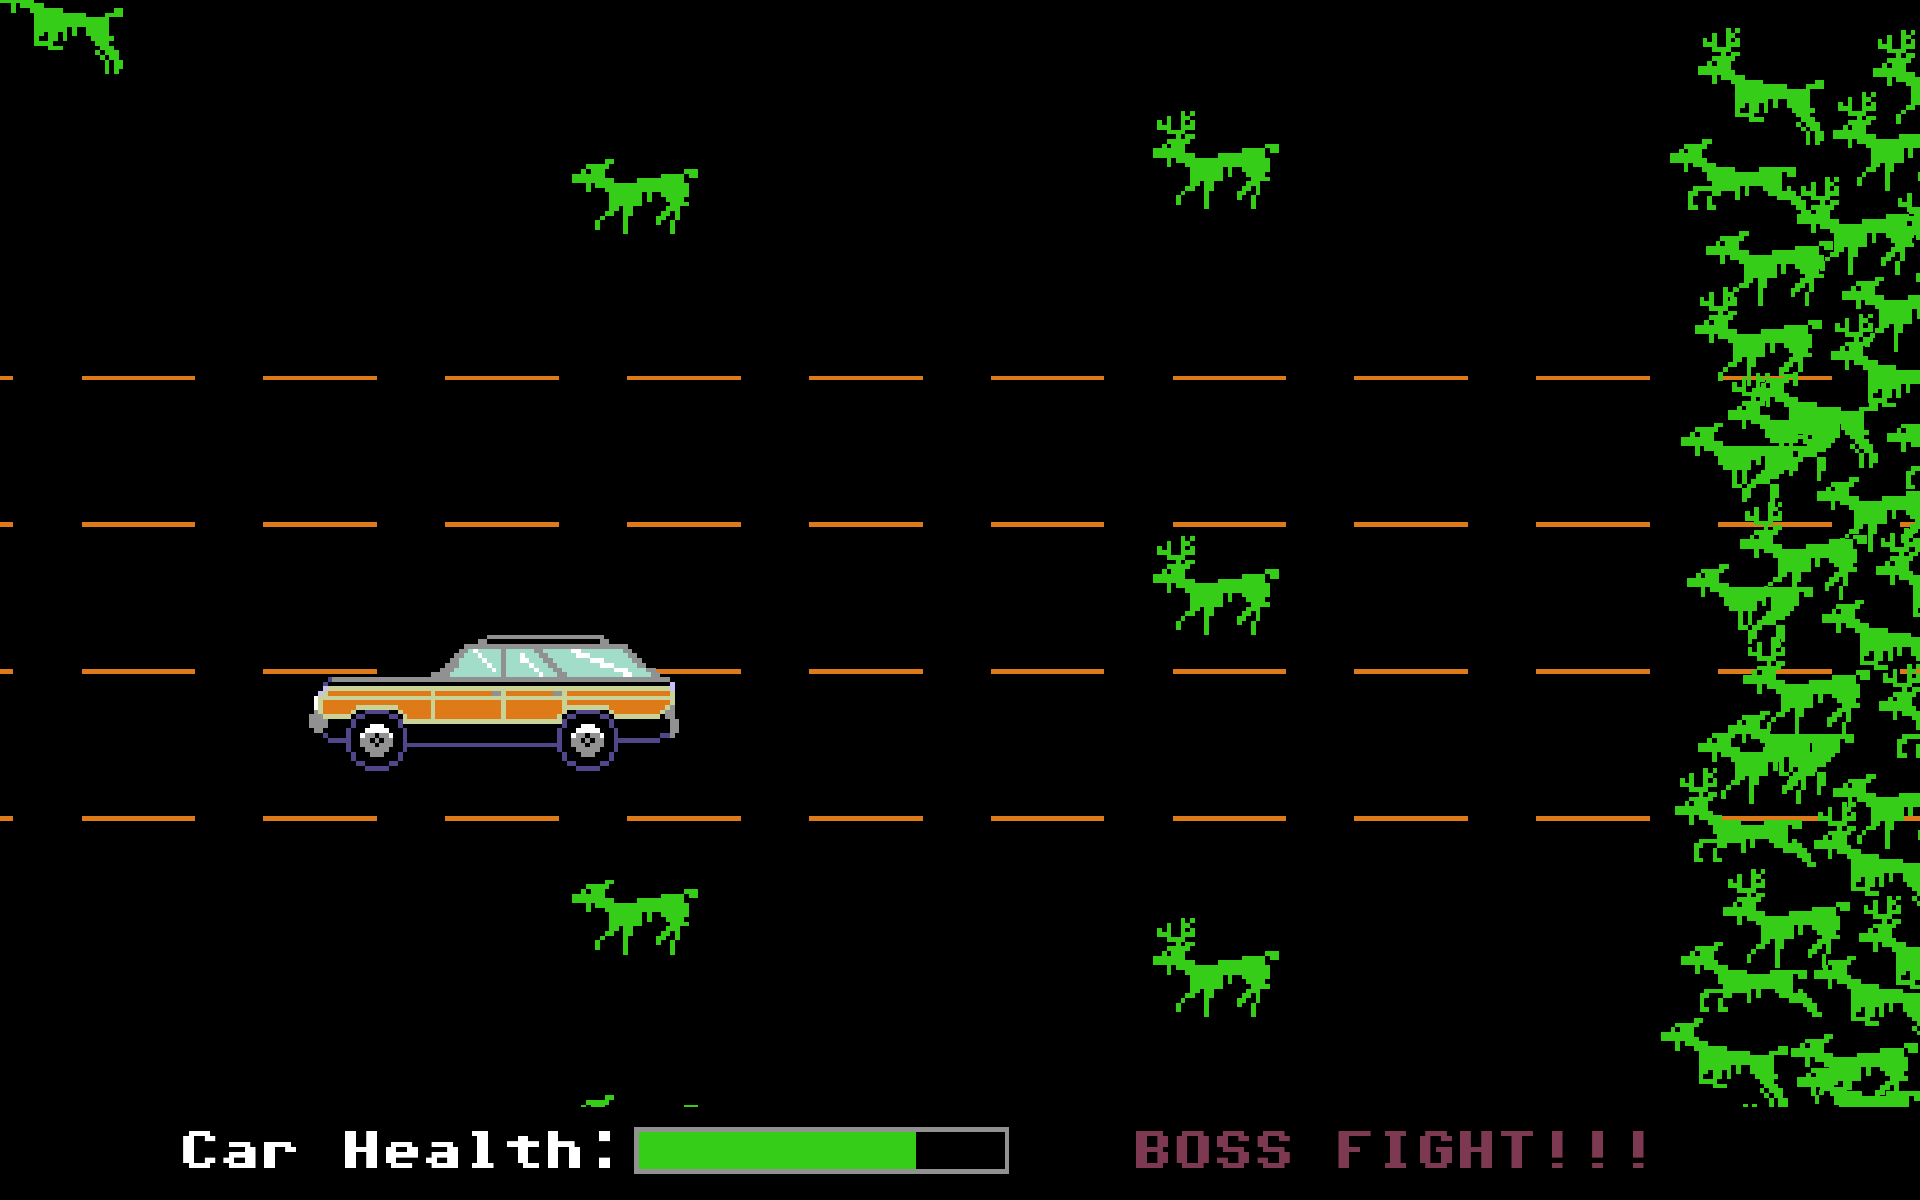 Screenshot of the car getting chased by a horde of zombie animals.